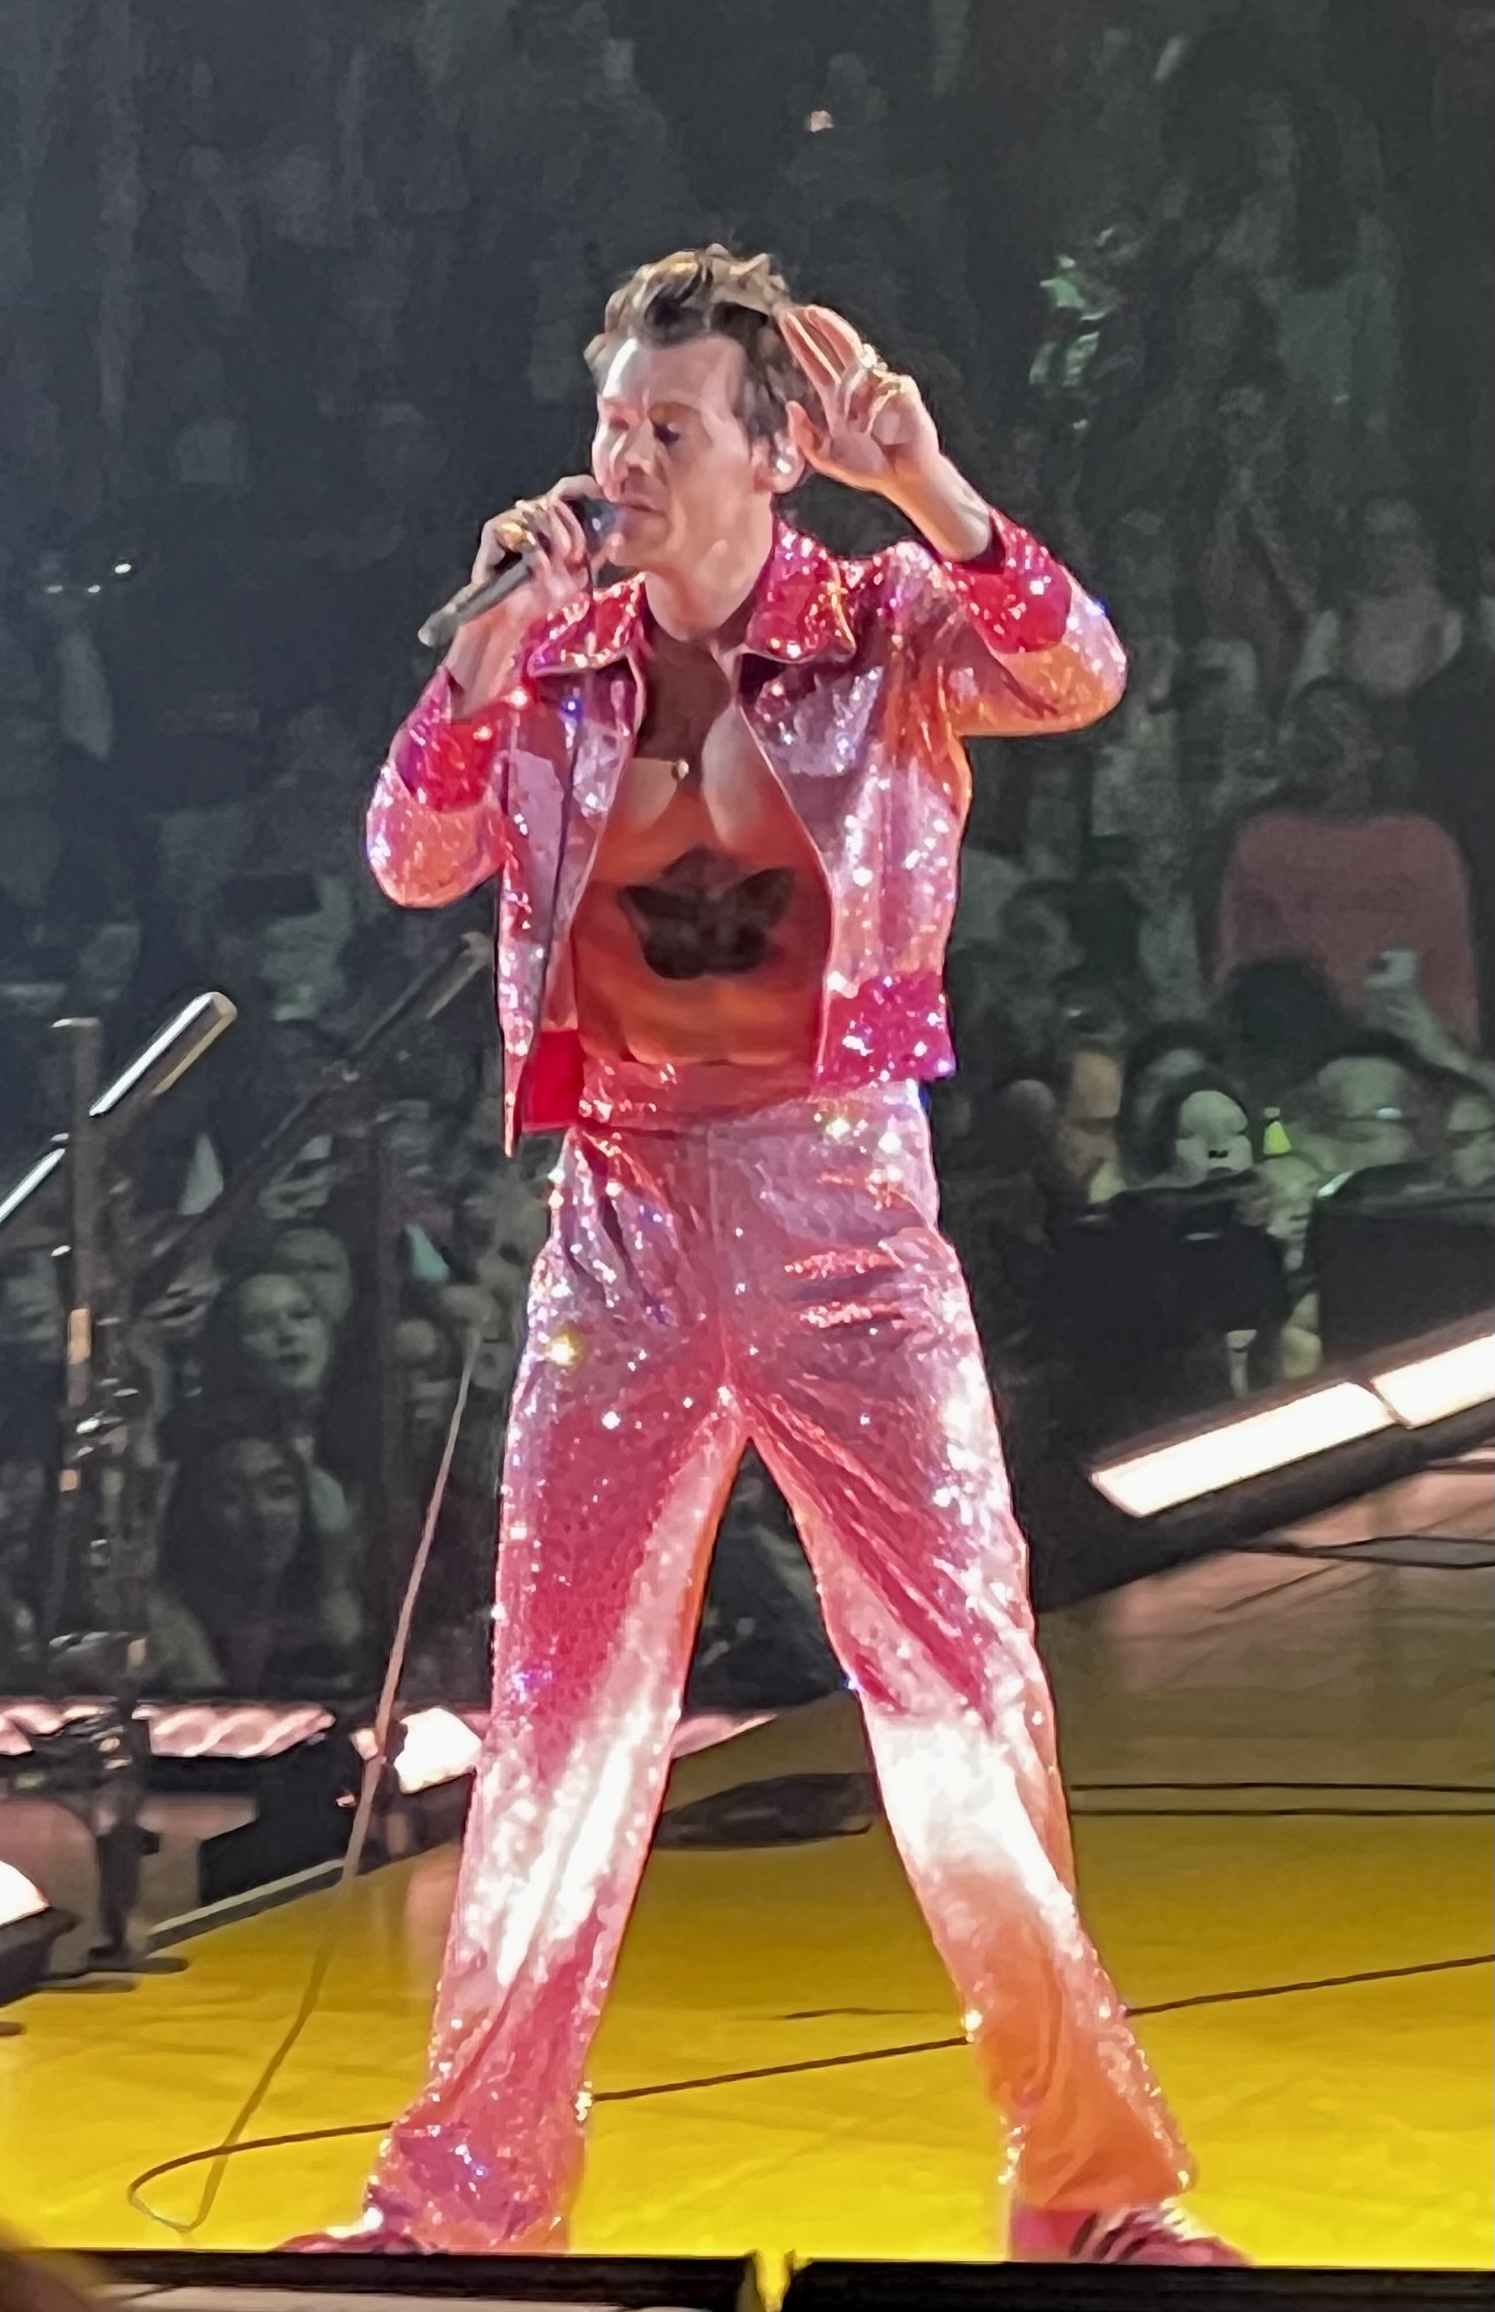 Harry Styles 29th Birthday Concert: Pink Outfit Photos